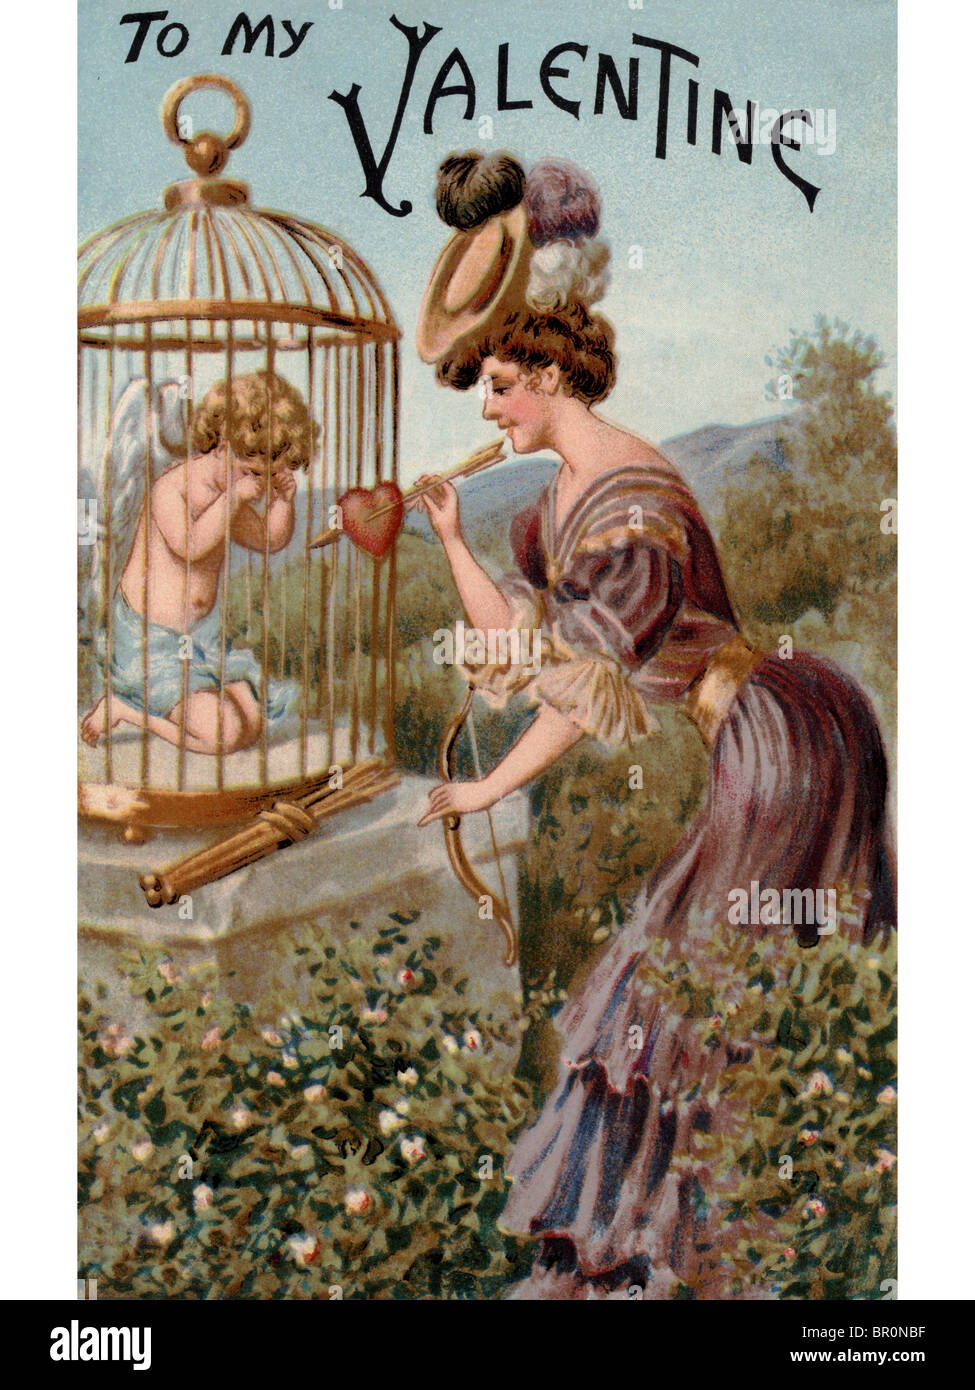 A vintage Valentine with a woman giving a bow and arrow back to a crying Cupid in a cage Stock Photo